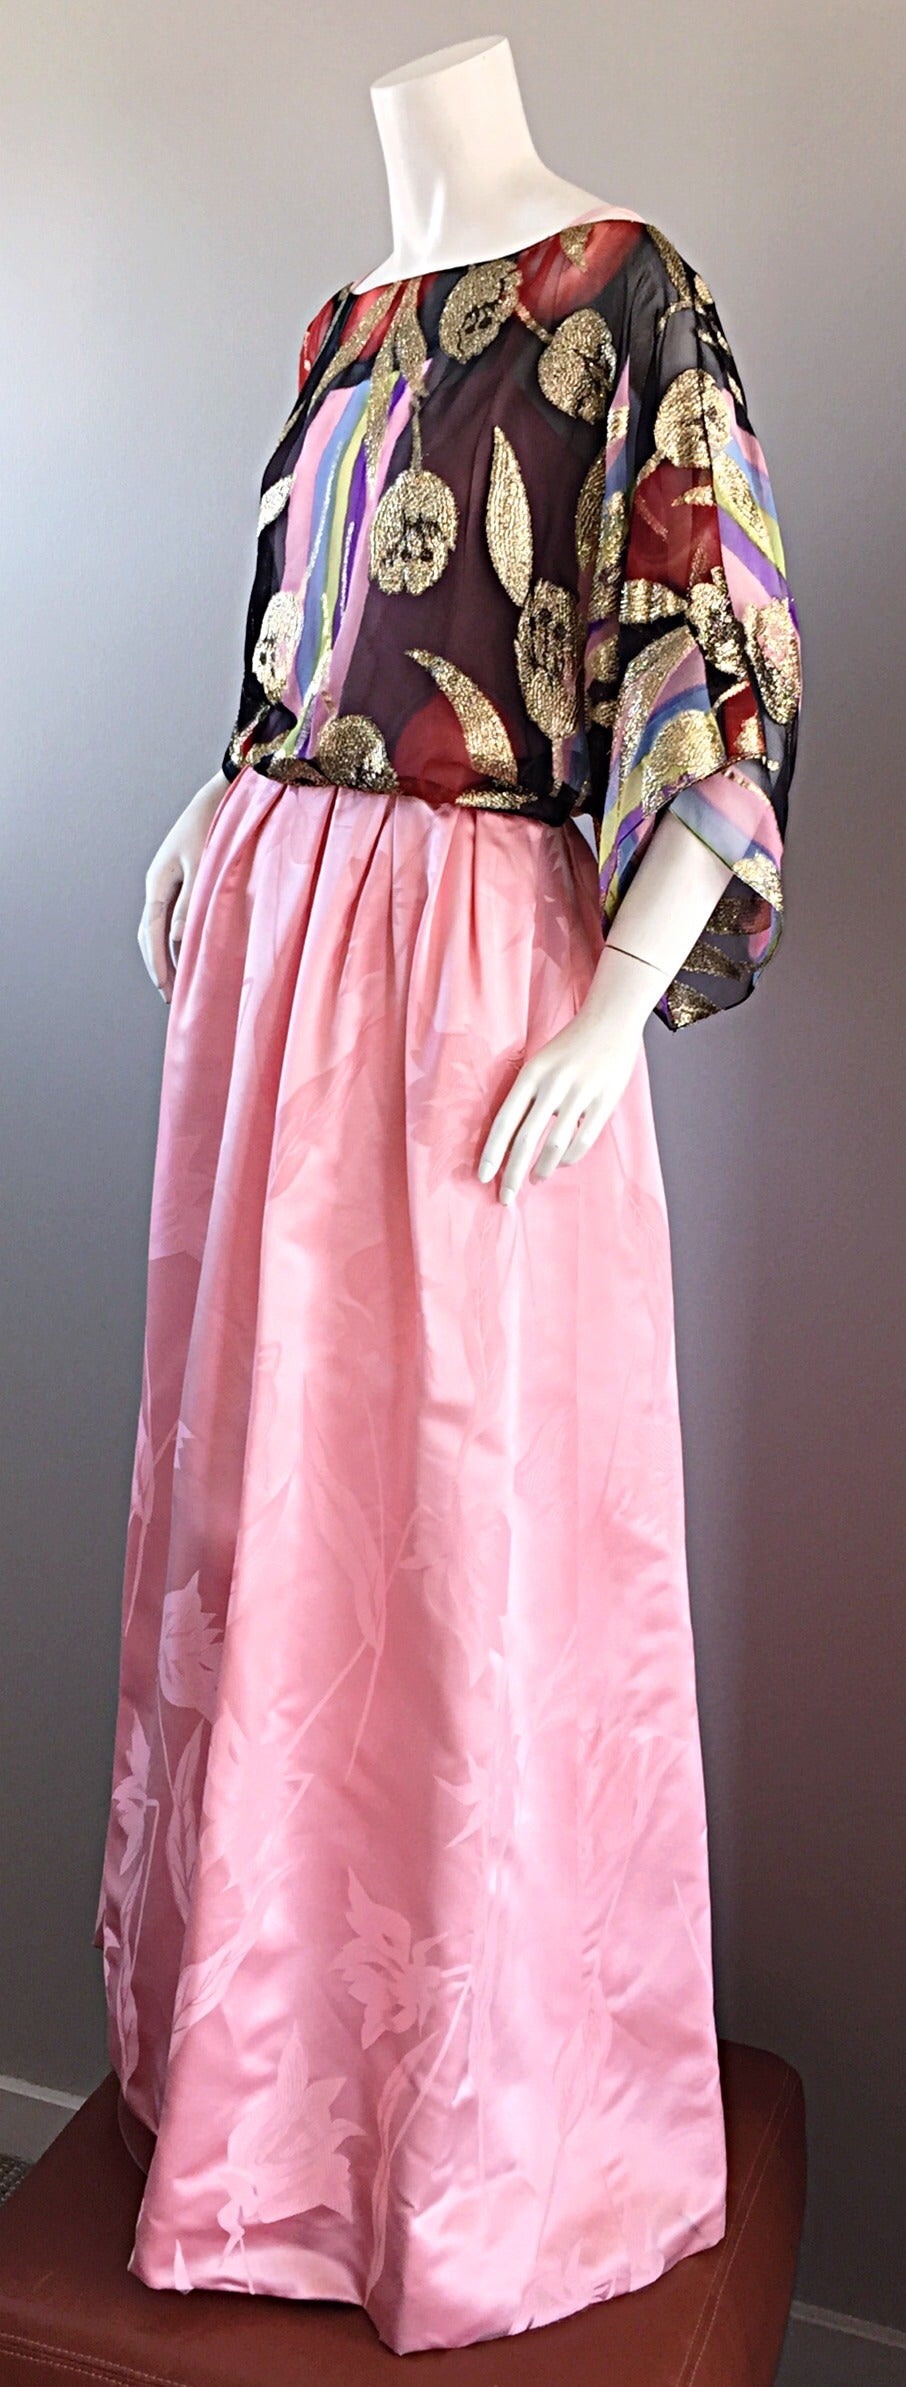 Breathtaking vintage pink gown, with attached colorful silk top! Full pink skirt, with heavy attention to detail, with a bohemian tropical moire throughout. Silk blouse features colorful vertical stripes, with gold metallic silk flowers sewn on top.